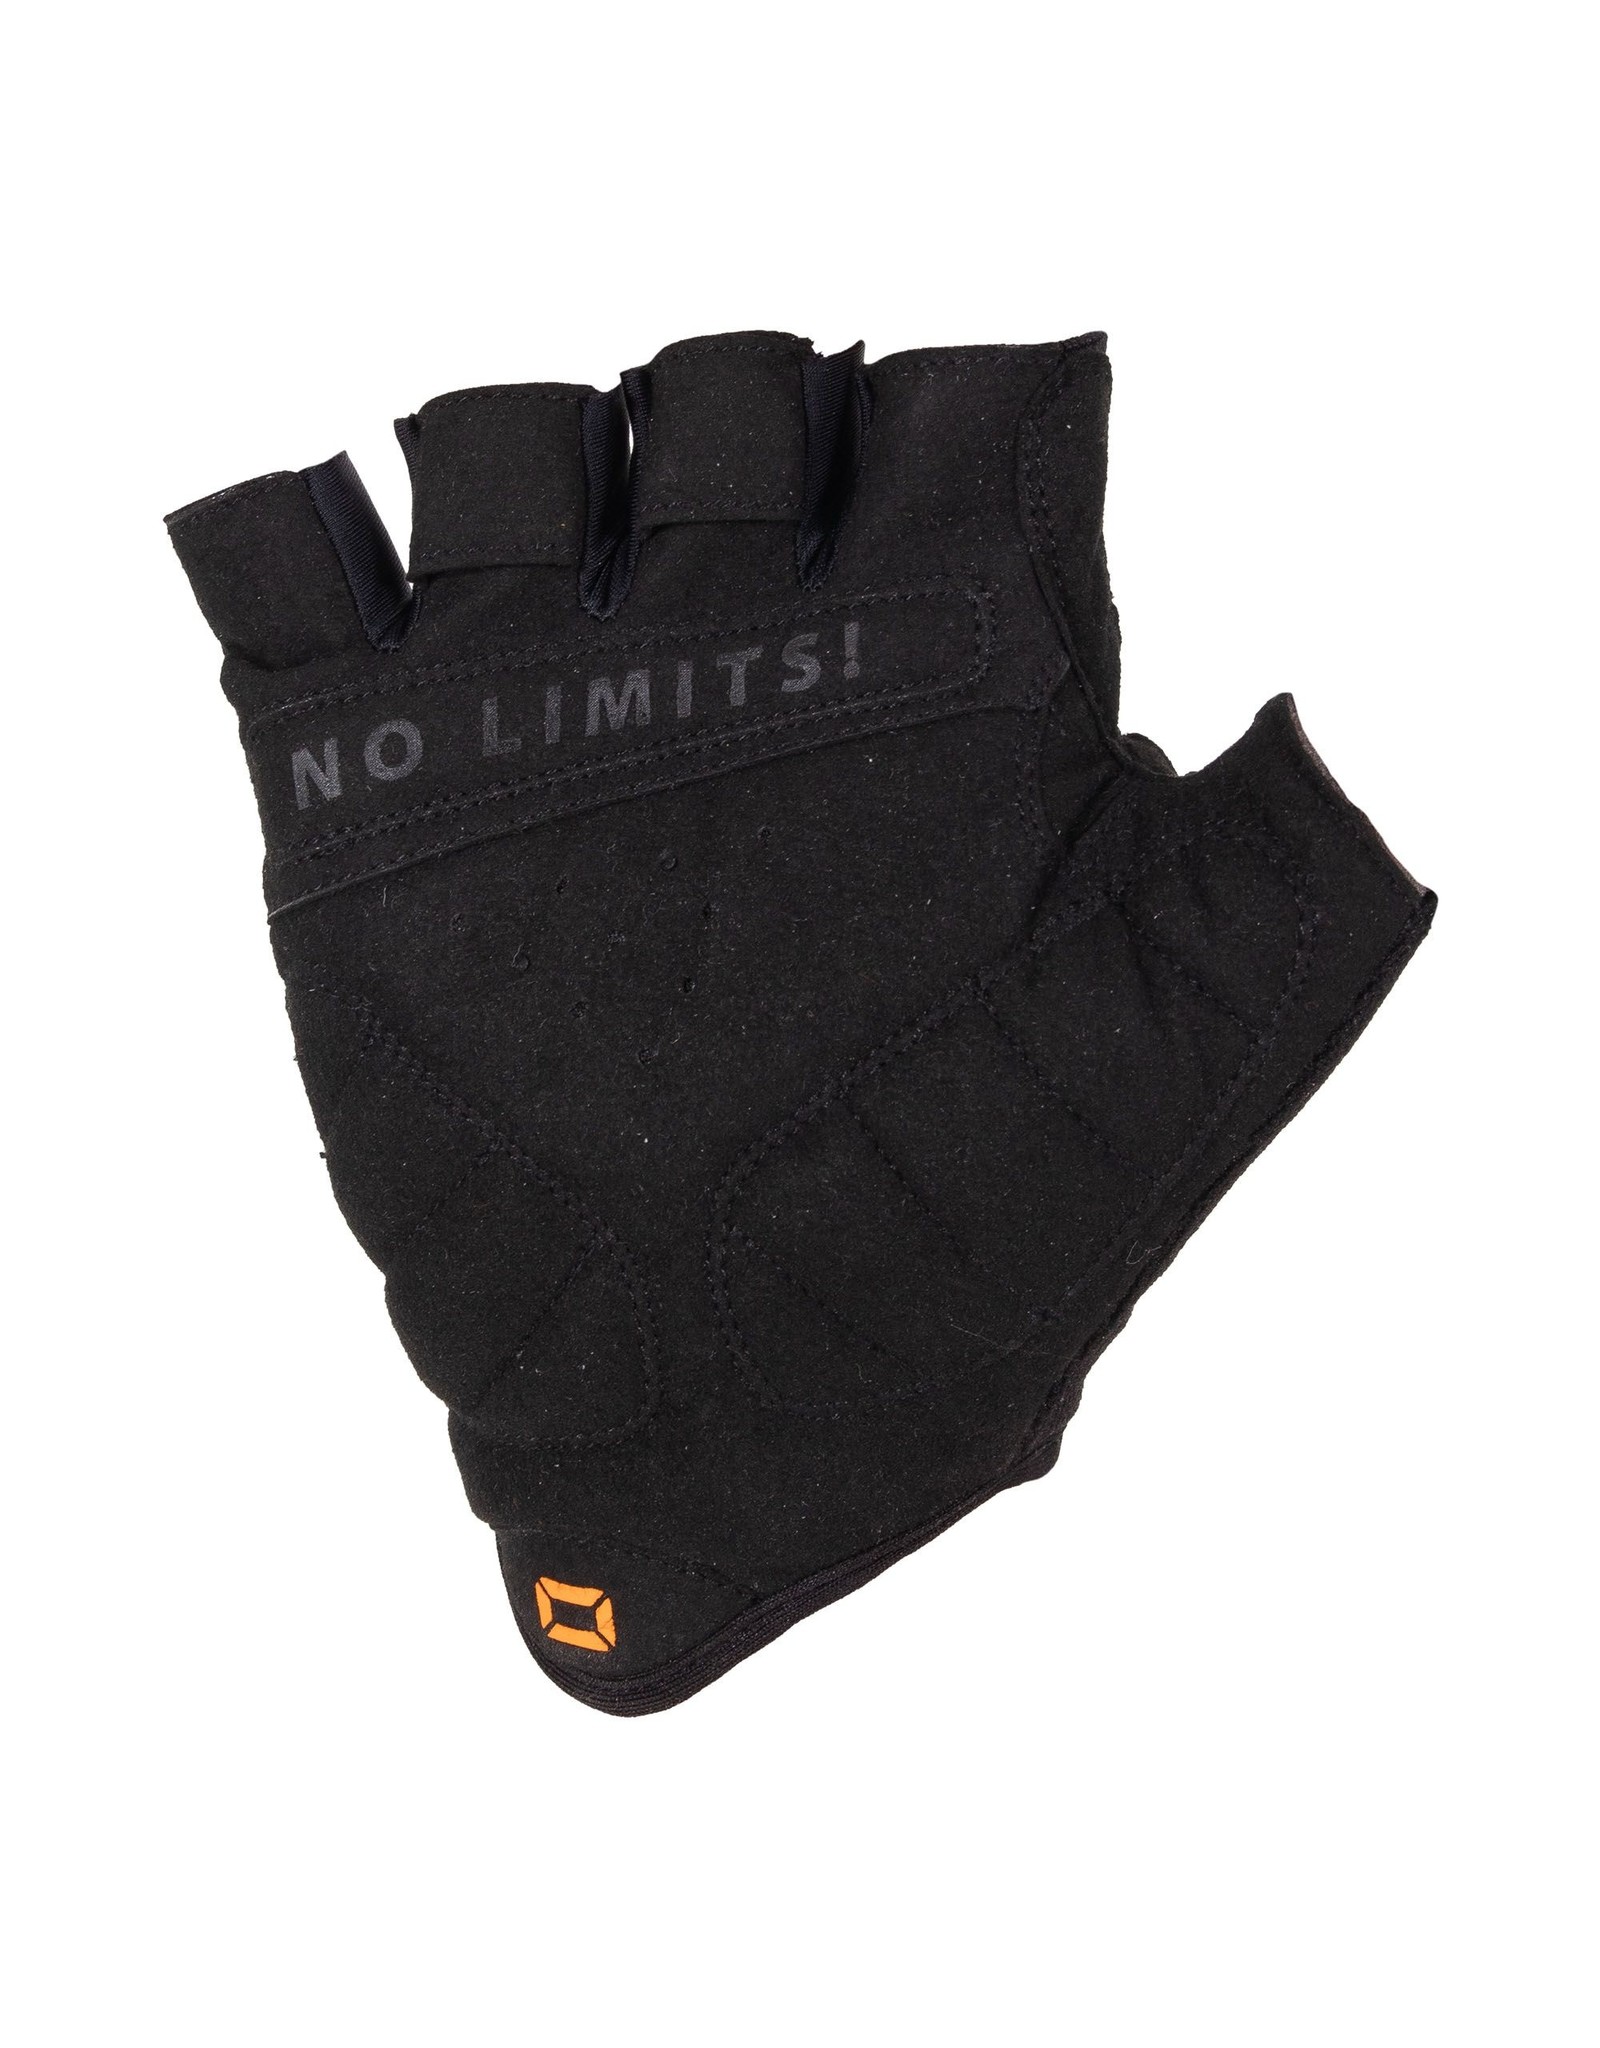 Stanno Fitness & Cycling Glove II-Black